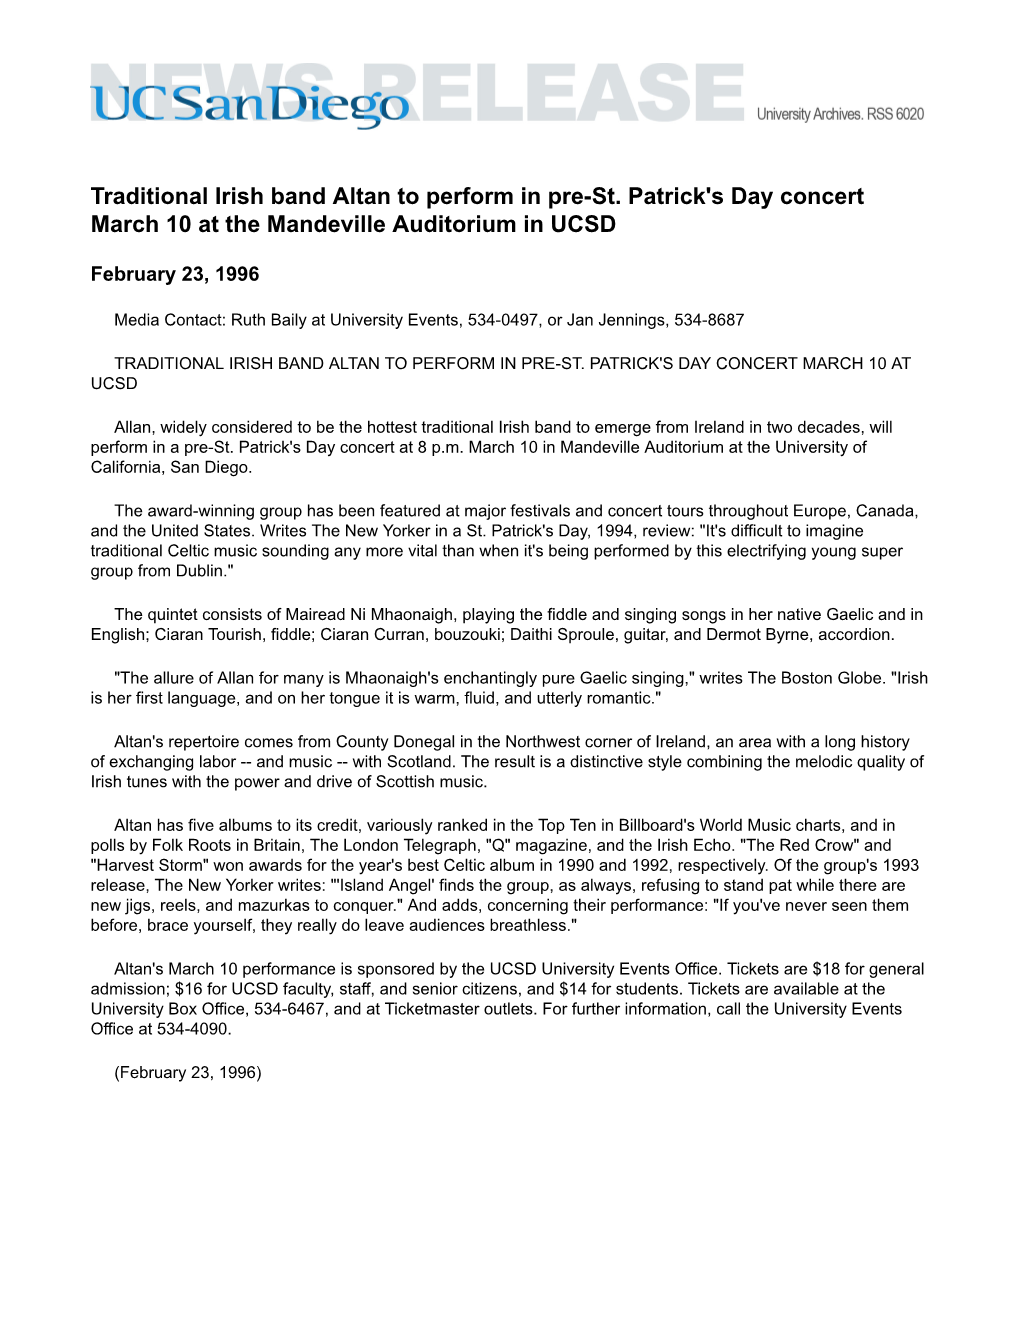 Traditional Irish Band Altan to Perform in Pre-St. Patrick's Day Concert March 10 at the Mandeville Auditorium in UCSD